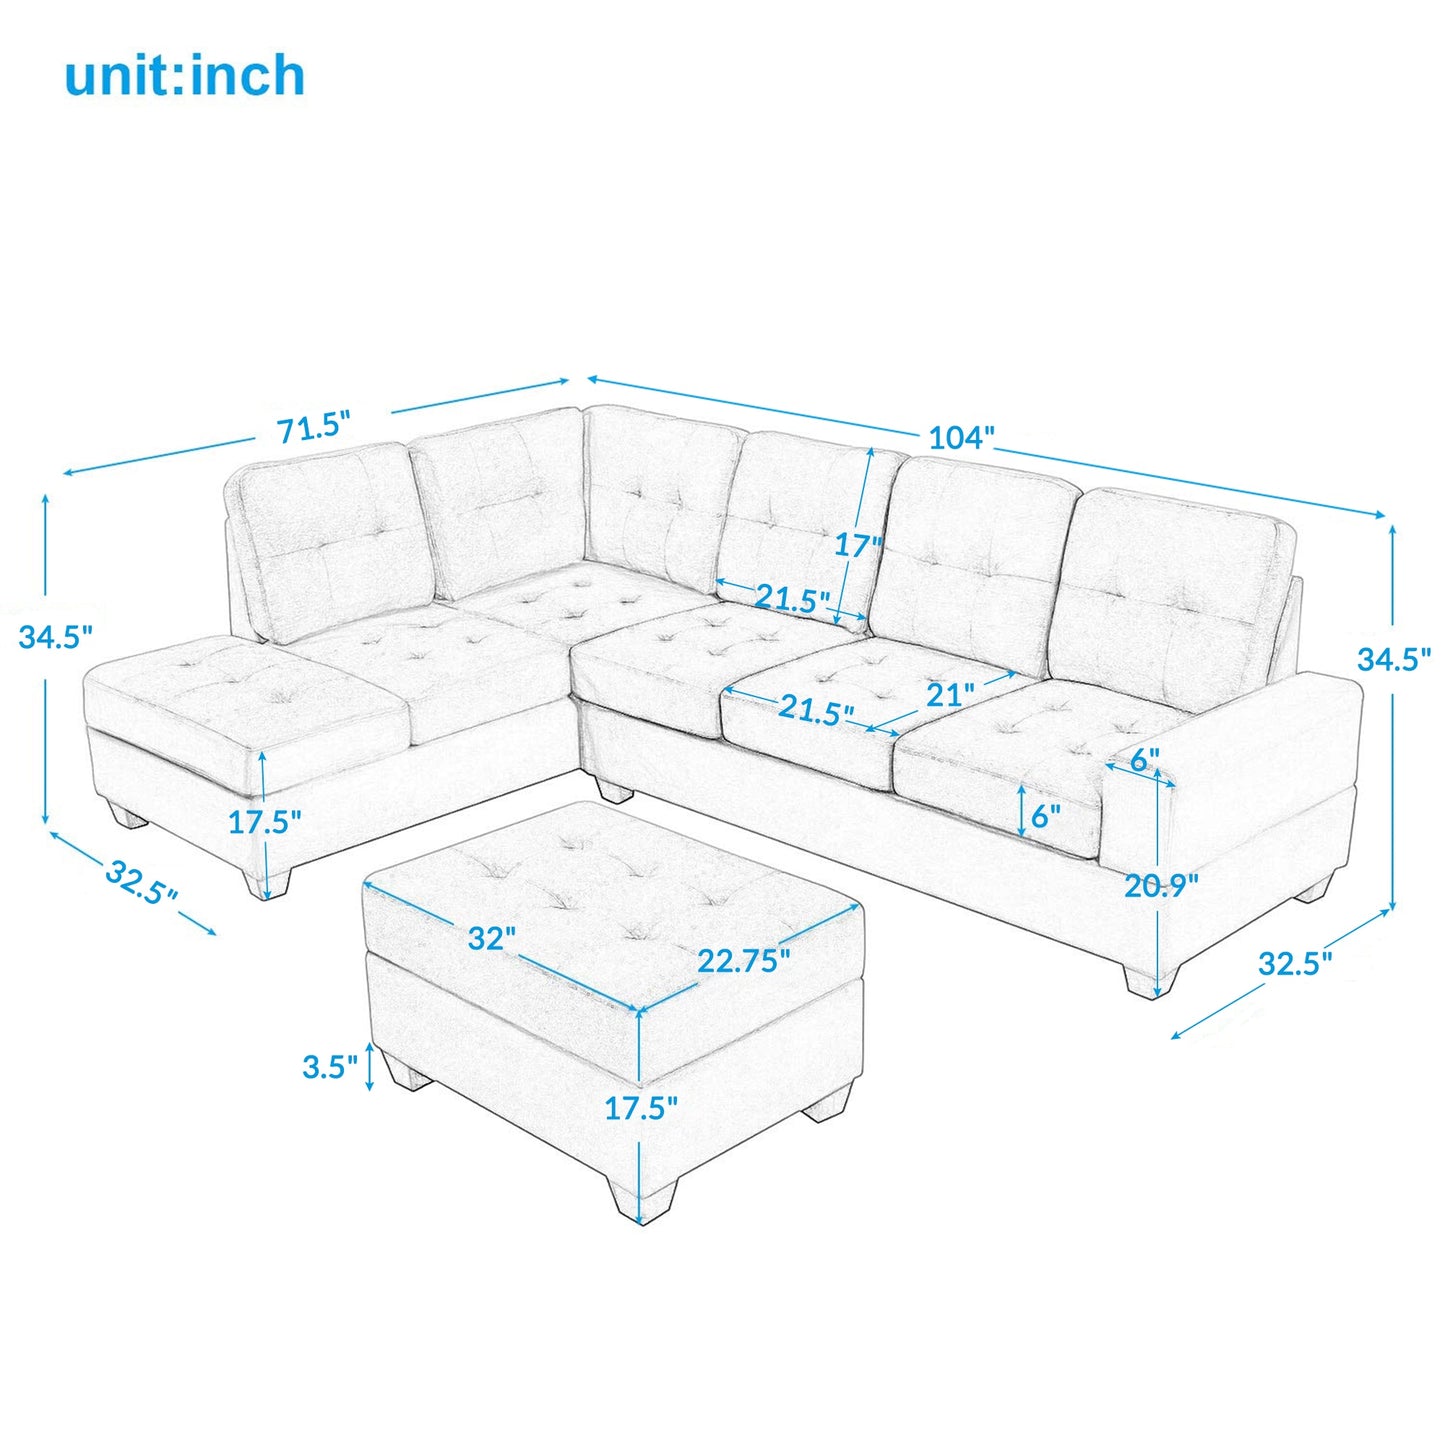 3 Piece Microfiber Sectional Sofa with Storage Ottoman and Cup Holders